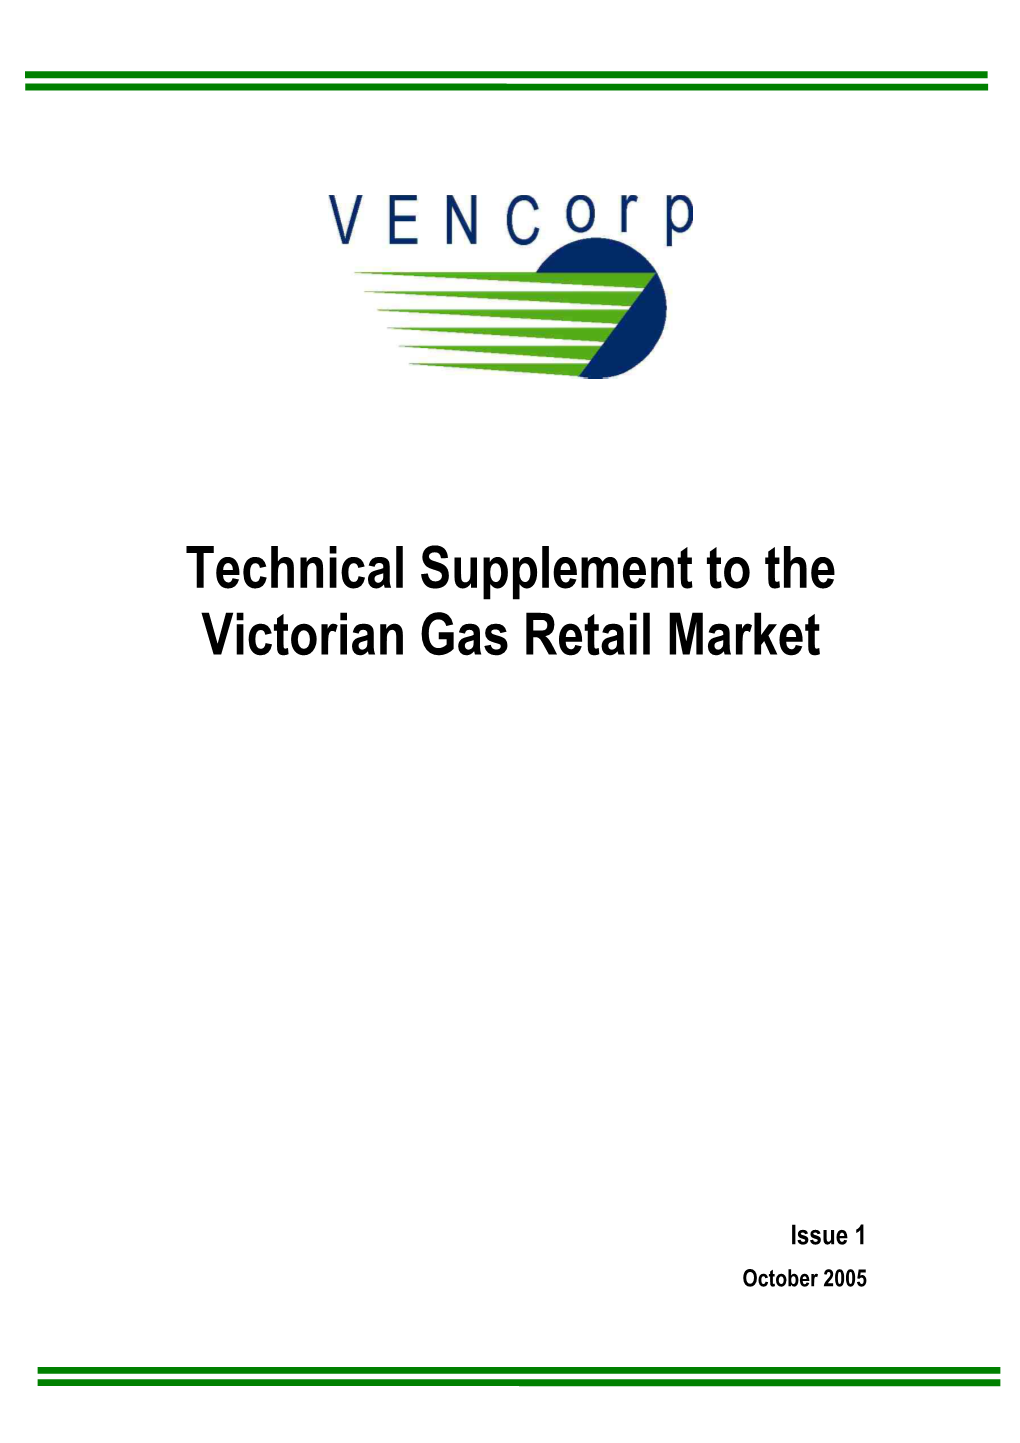 Technical Supplement to the Victorian Gas Retail Market